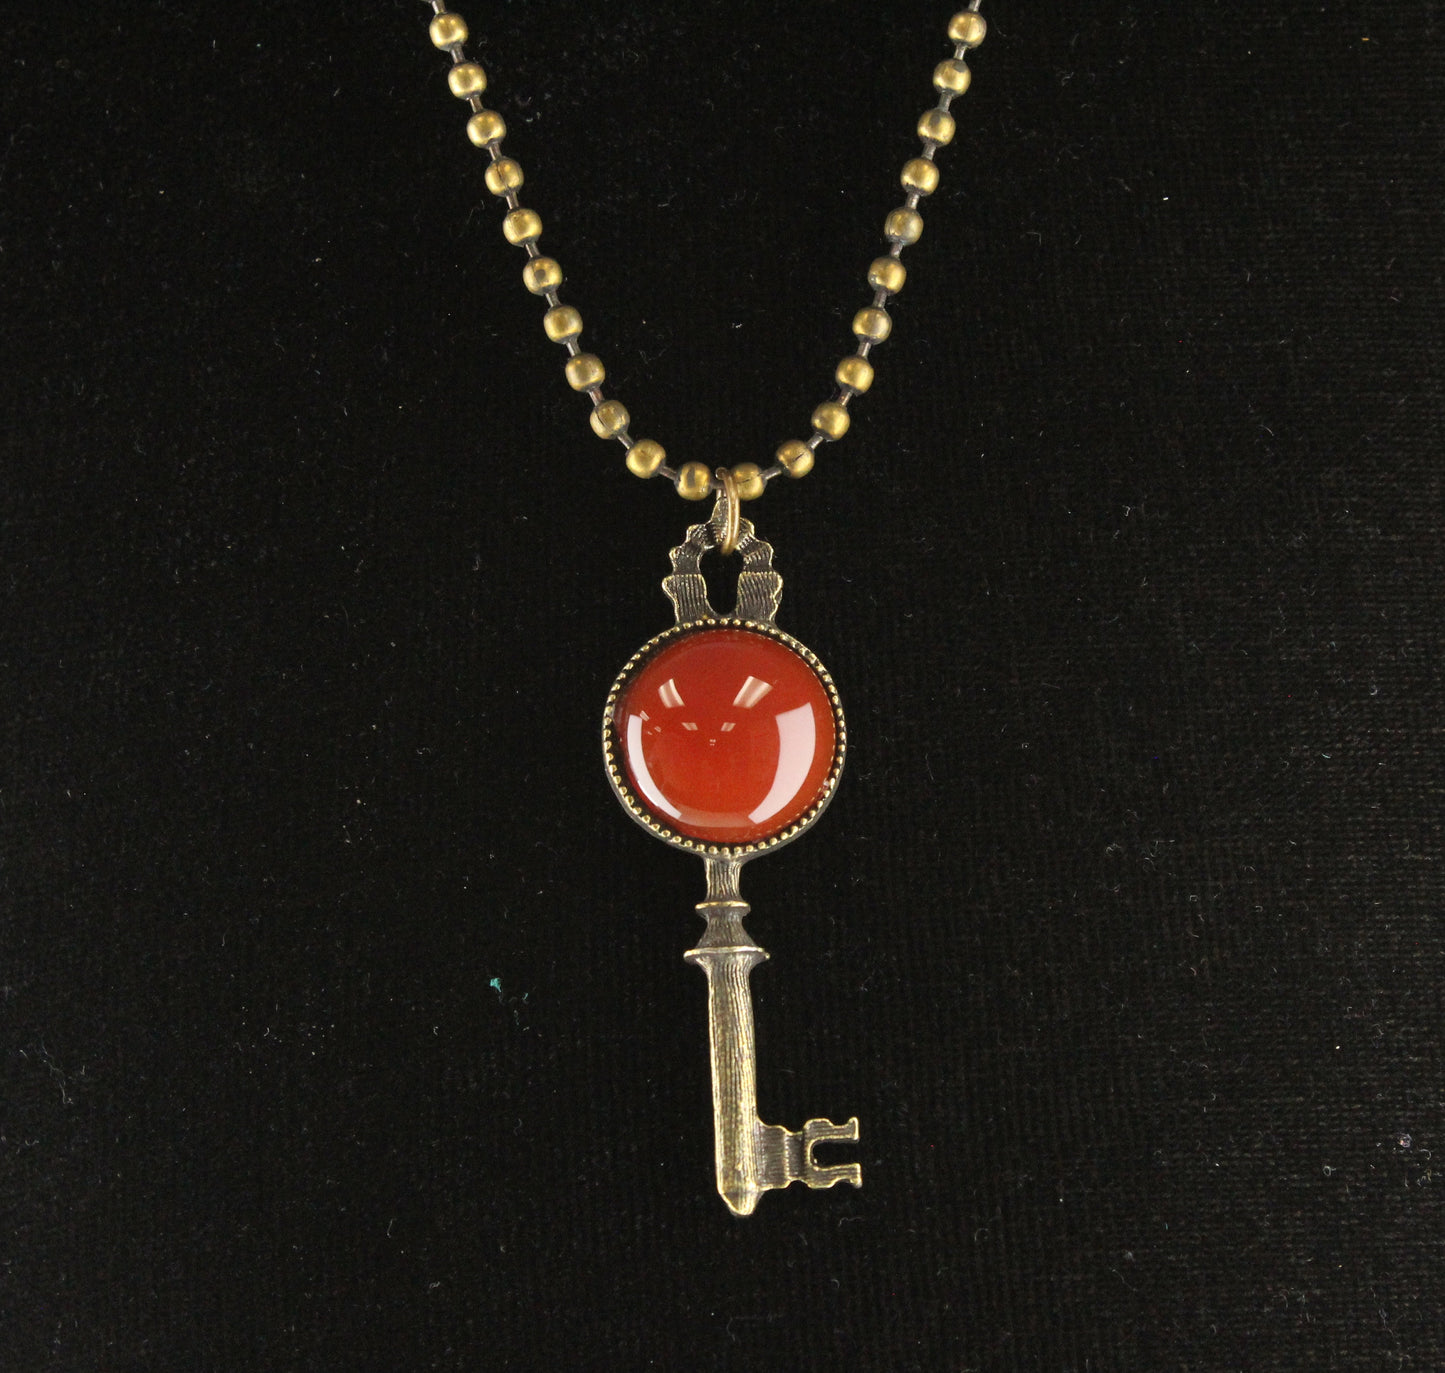 Key Pendant Necklace with Red Jasper Stone, Antique Gold Ball Chain, 18" or 24", Made in USA, each